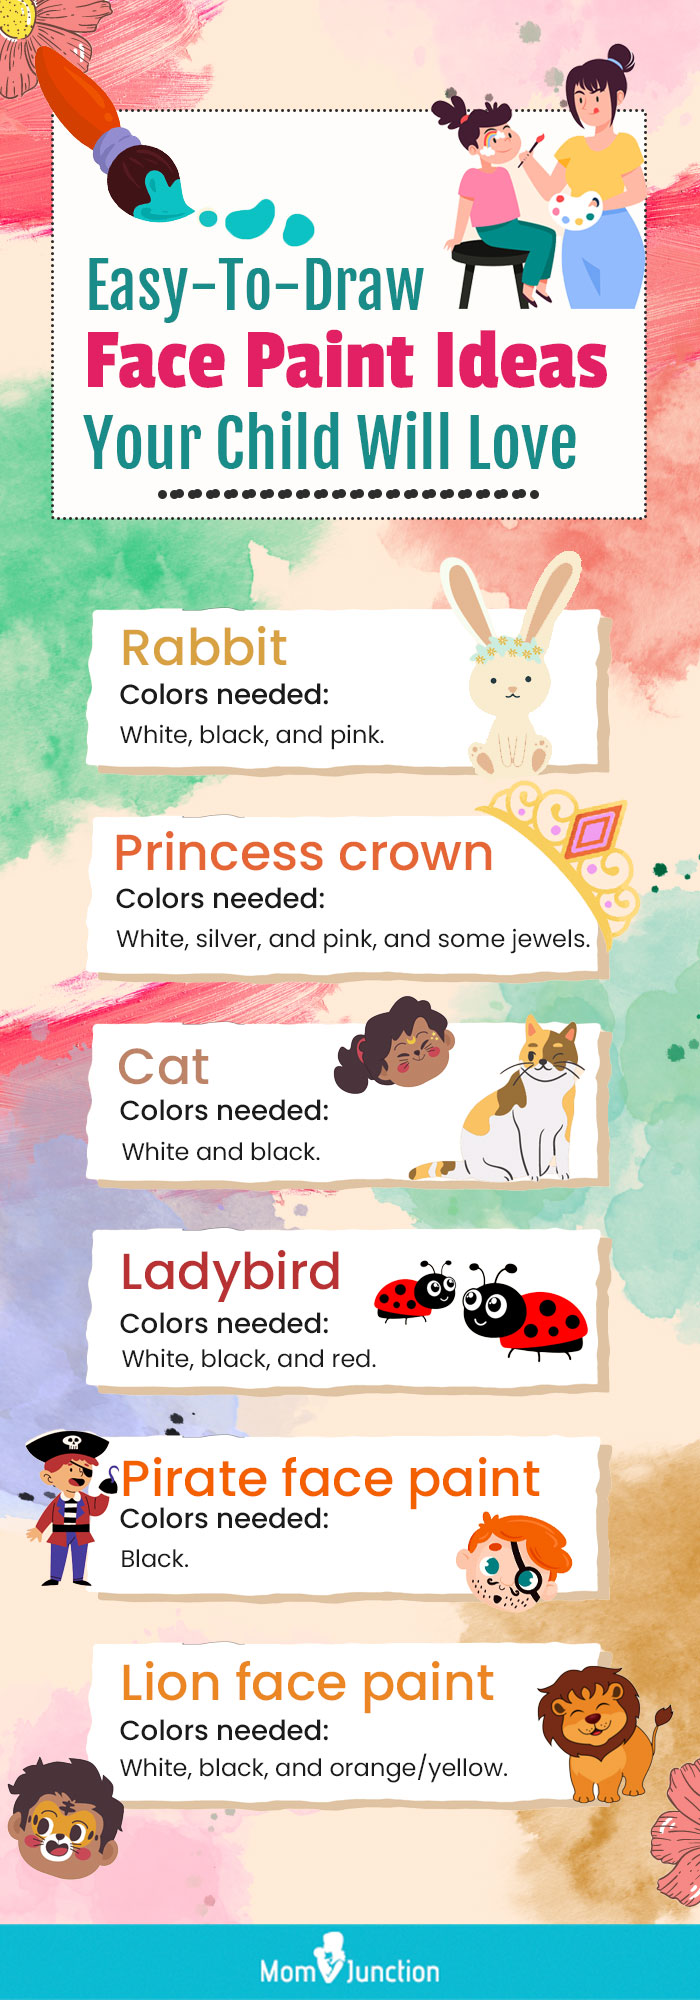 easy to draw face paint ideas your child will love (infographic)